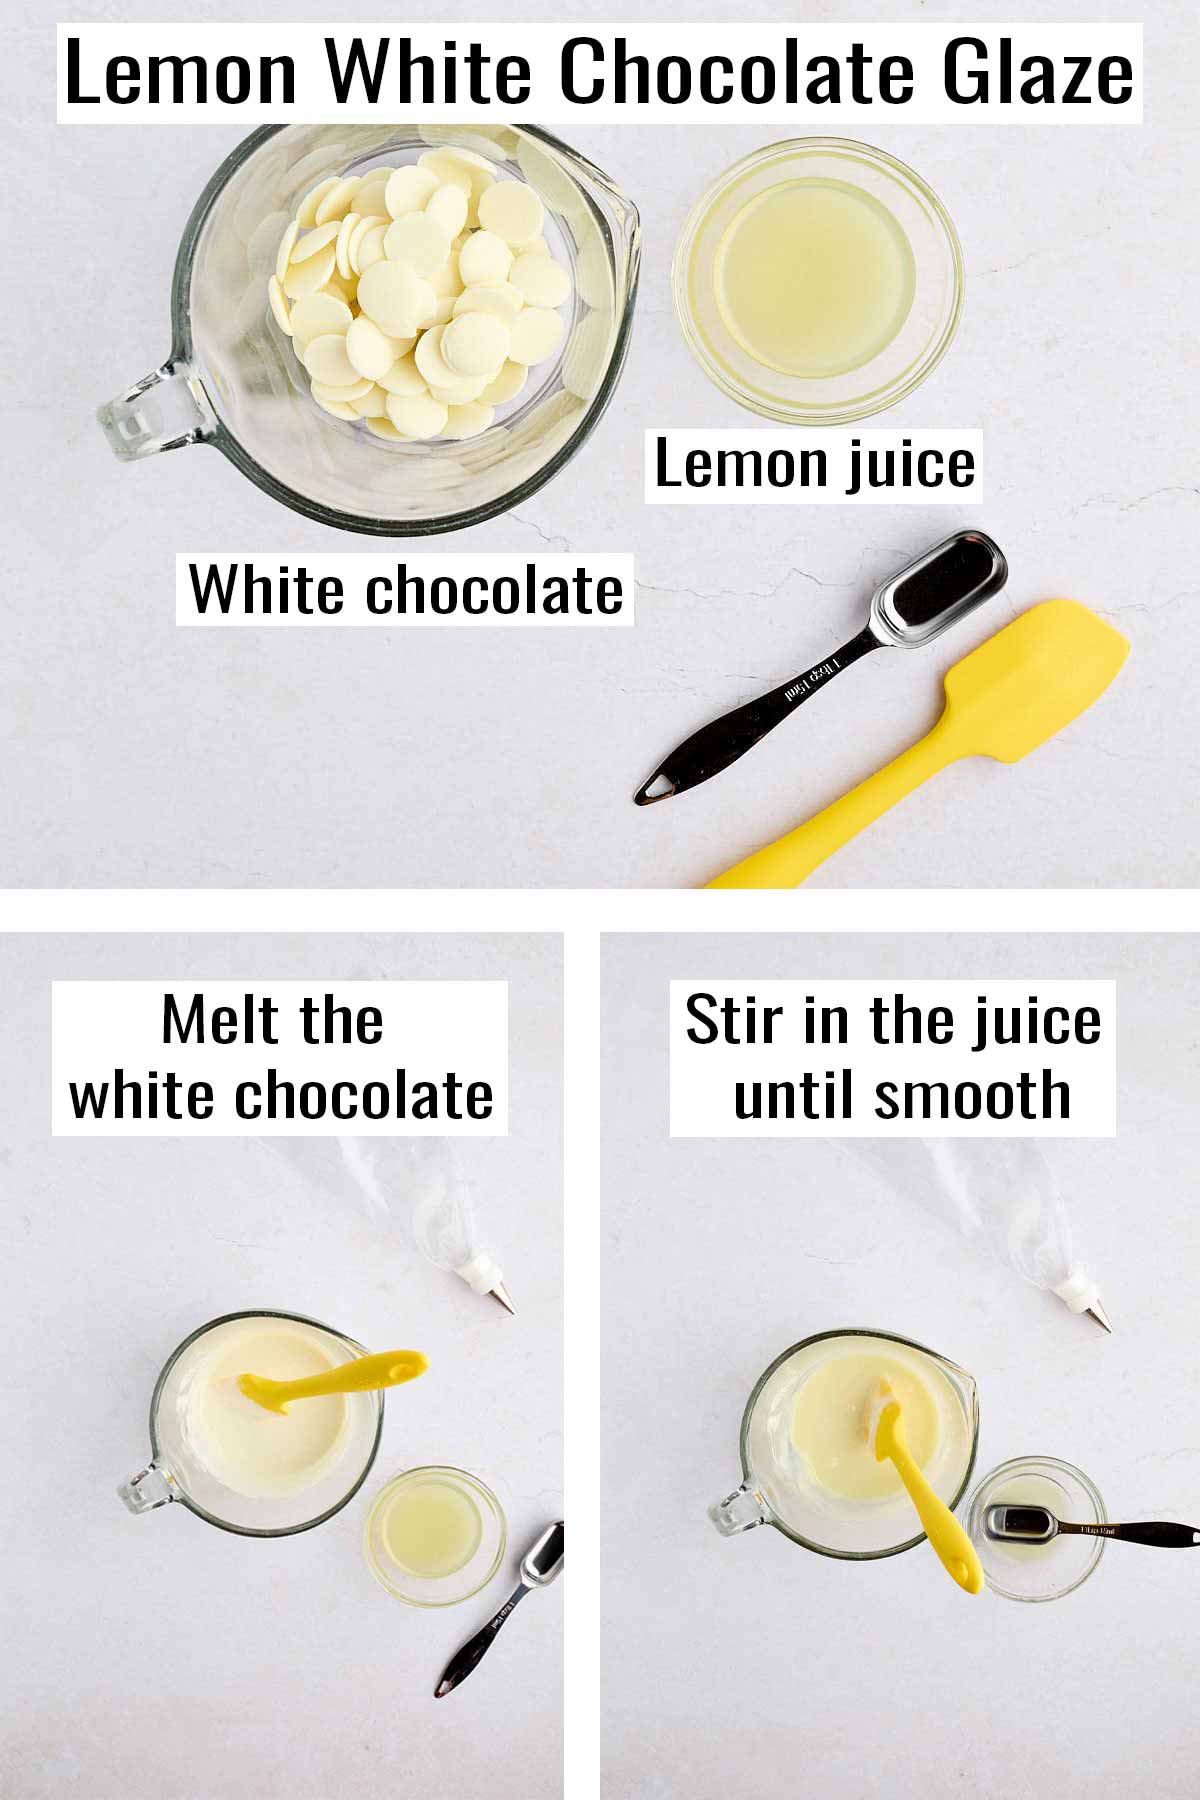 Step-by-step photos showing making the white chocolate lemon glaze. Melt the chocolate and then stir in the juice.